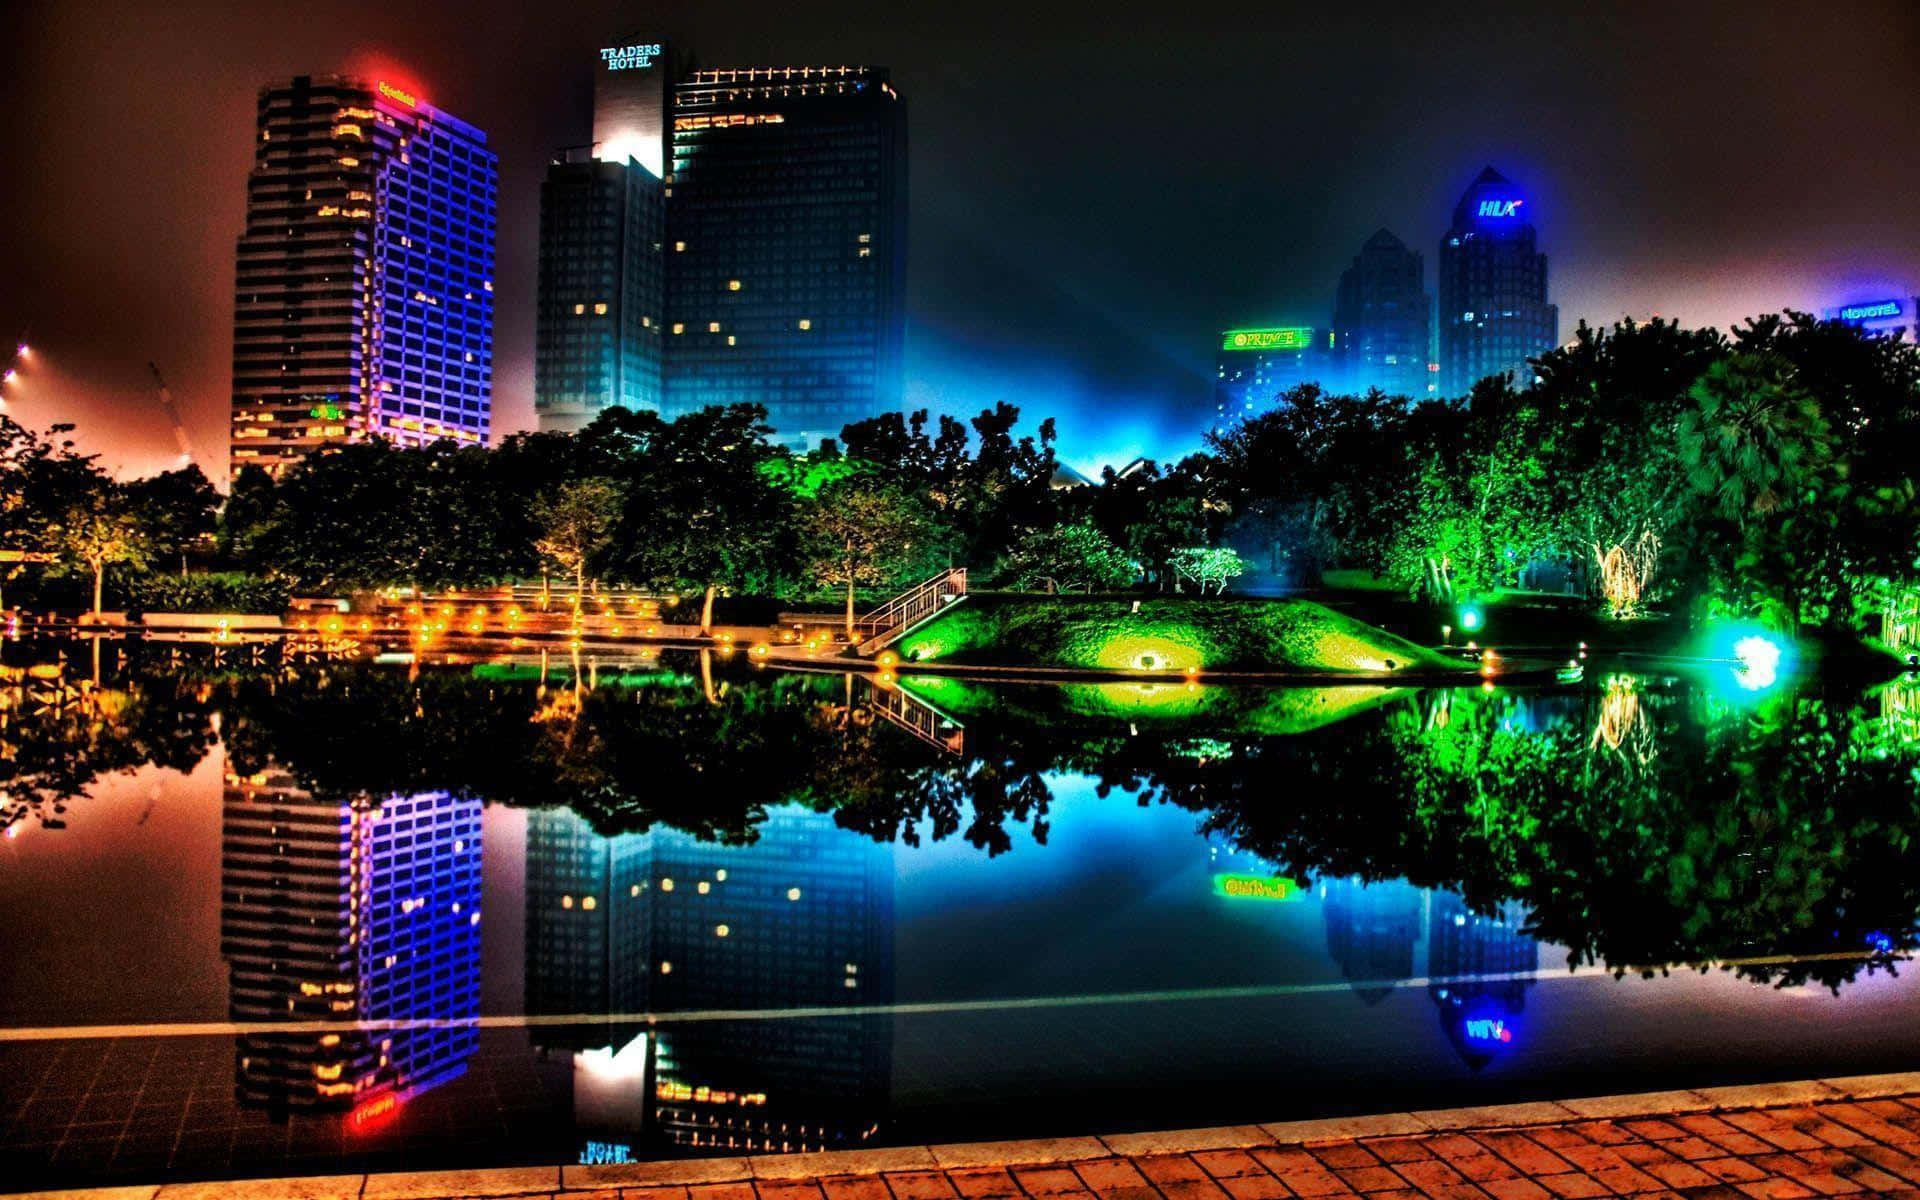 A City At Night With Lights Reflecting In The Water